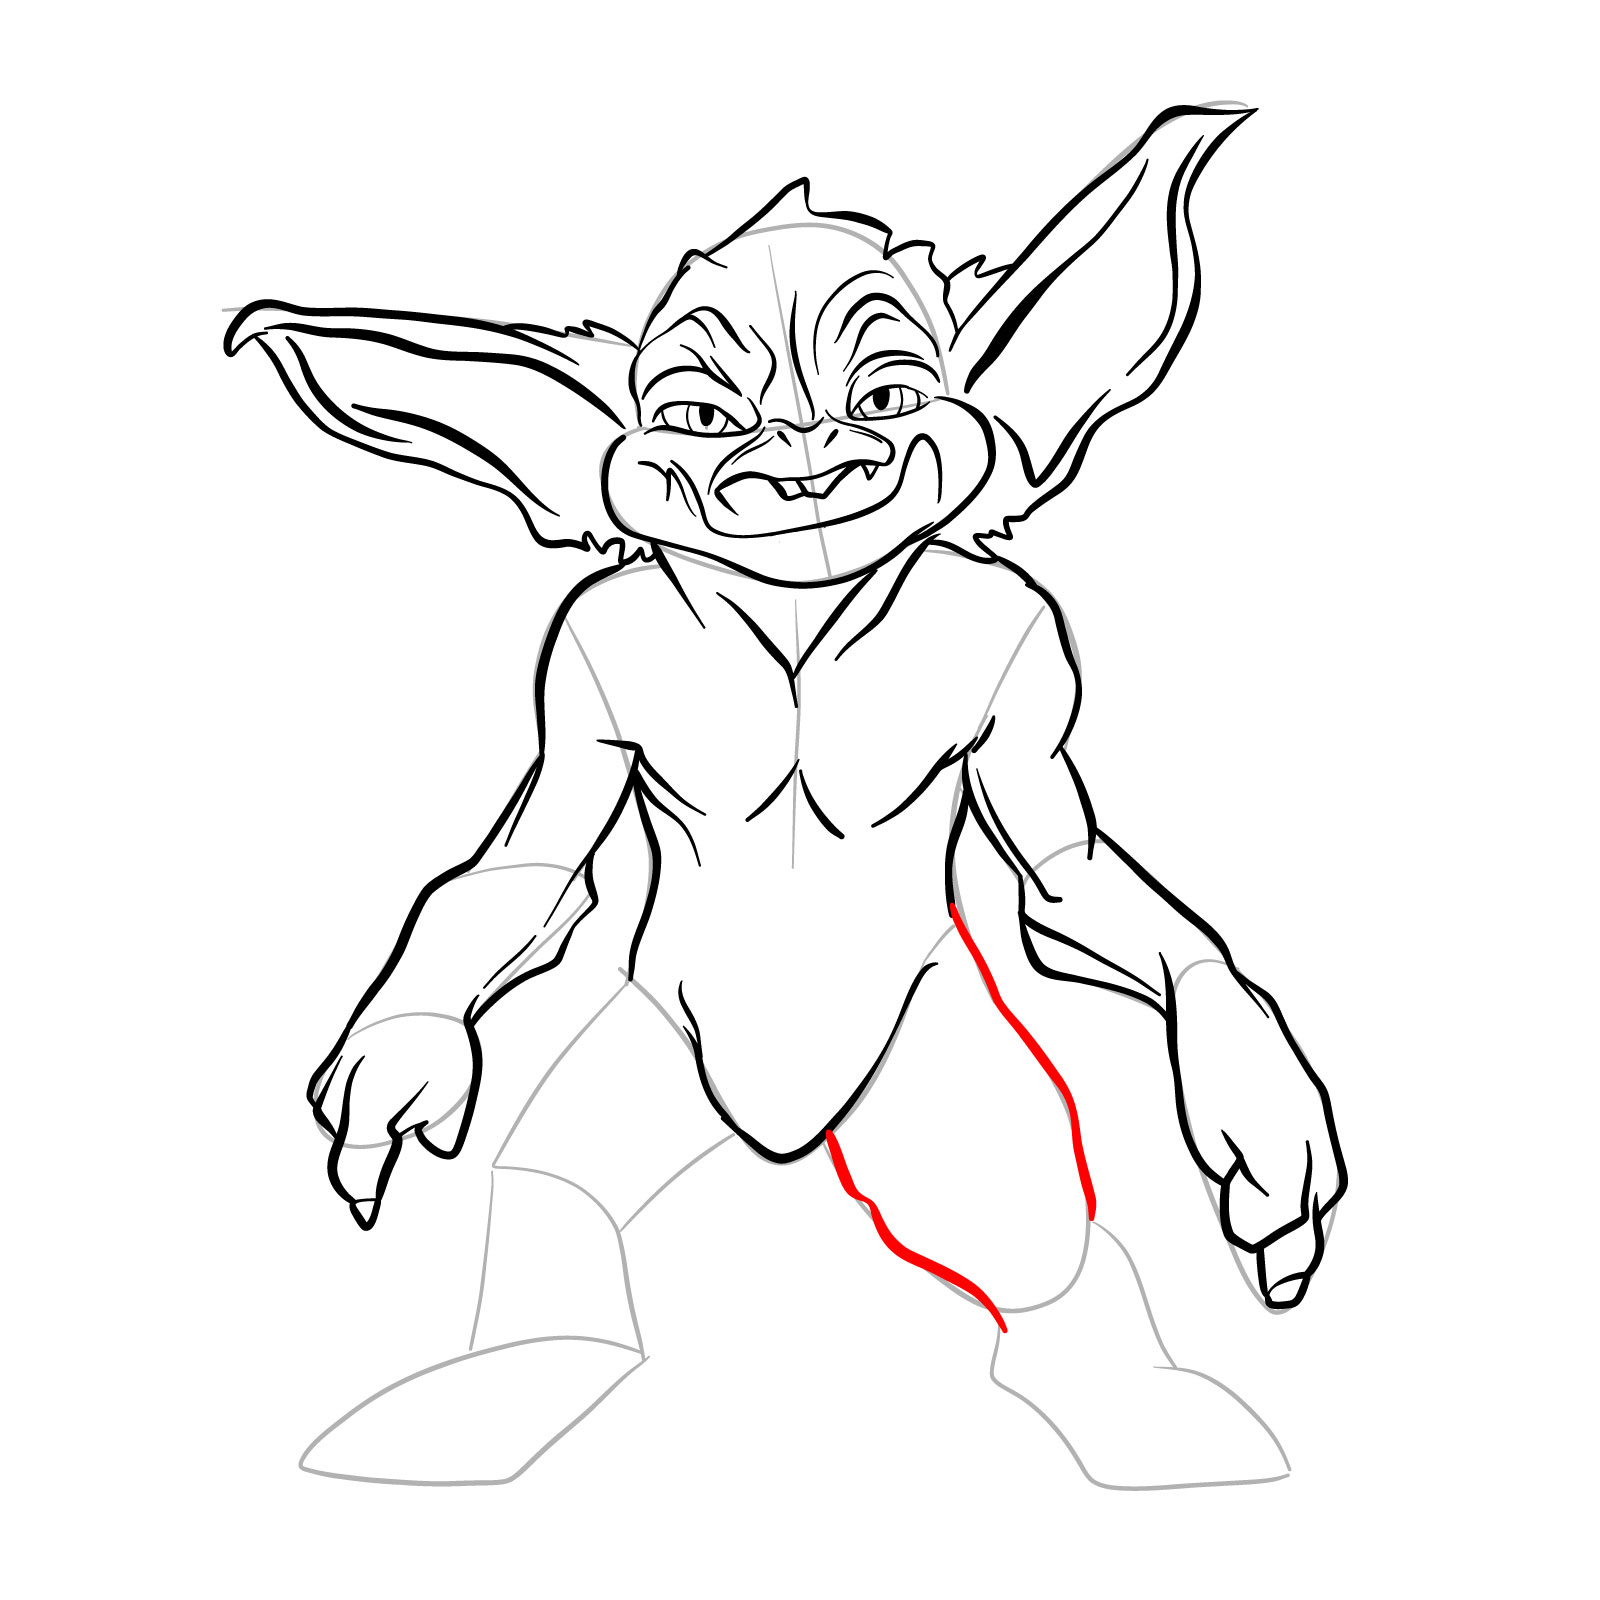 How to draw a Goblin - step 23